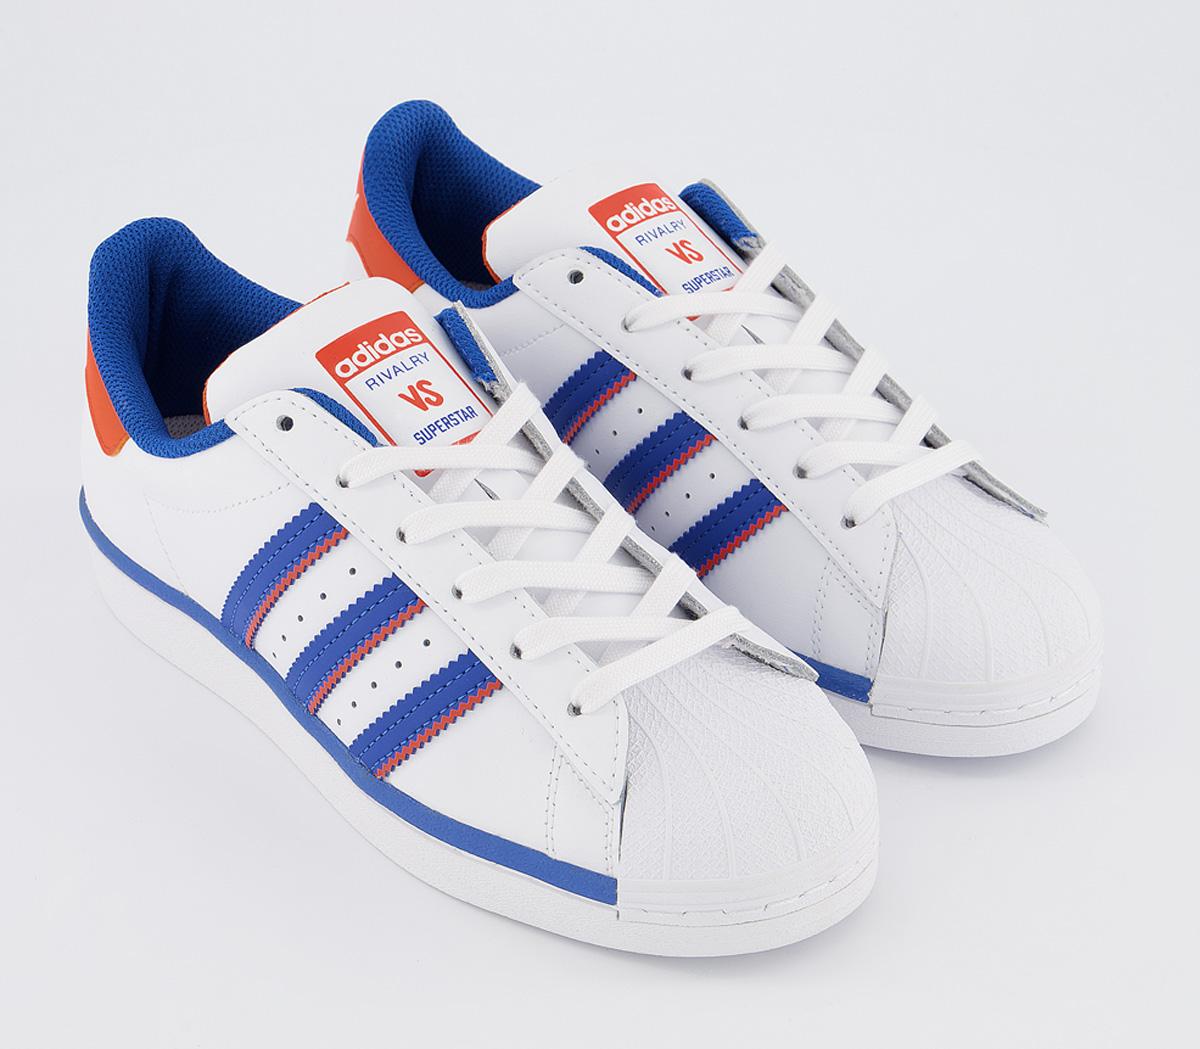 adidas Superstar Trainers White Blue Orange - His trainers